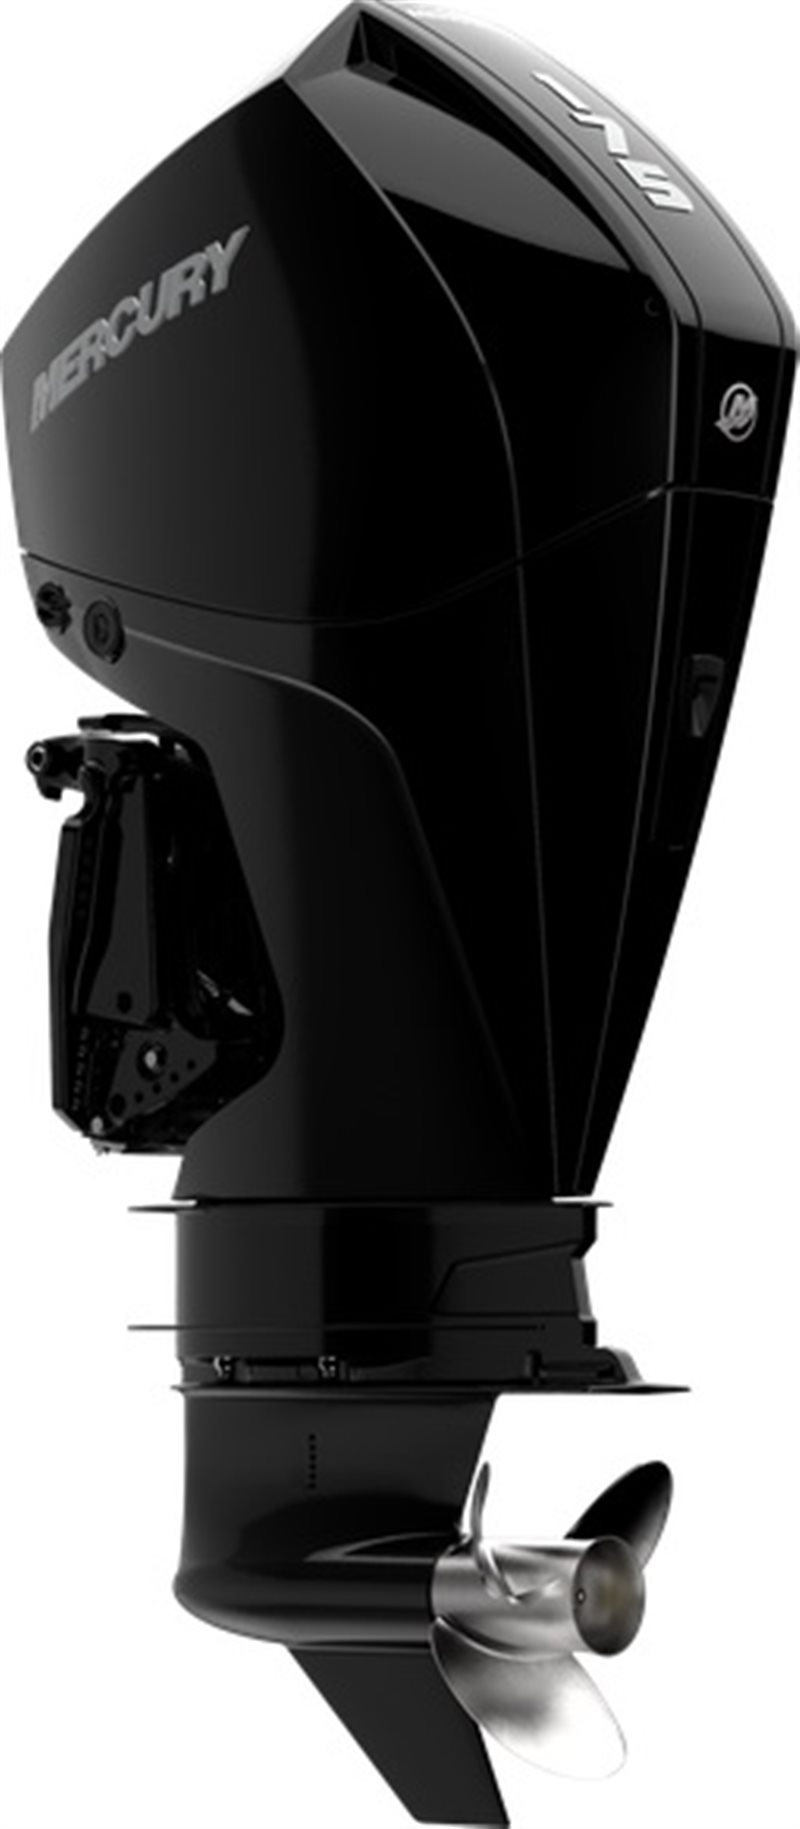 2020 Mercury Outboard Fourstroke 175 - 300 225 HP at Fort Fremont Marine